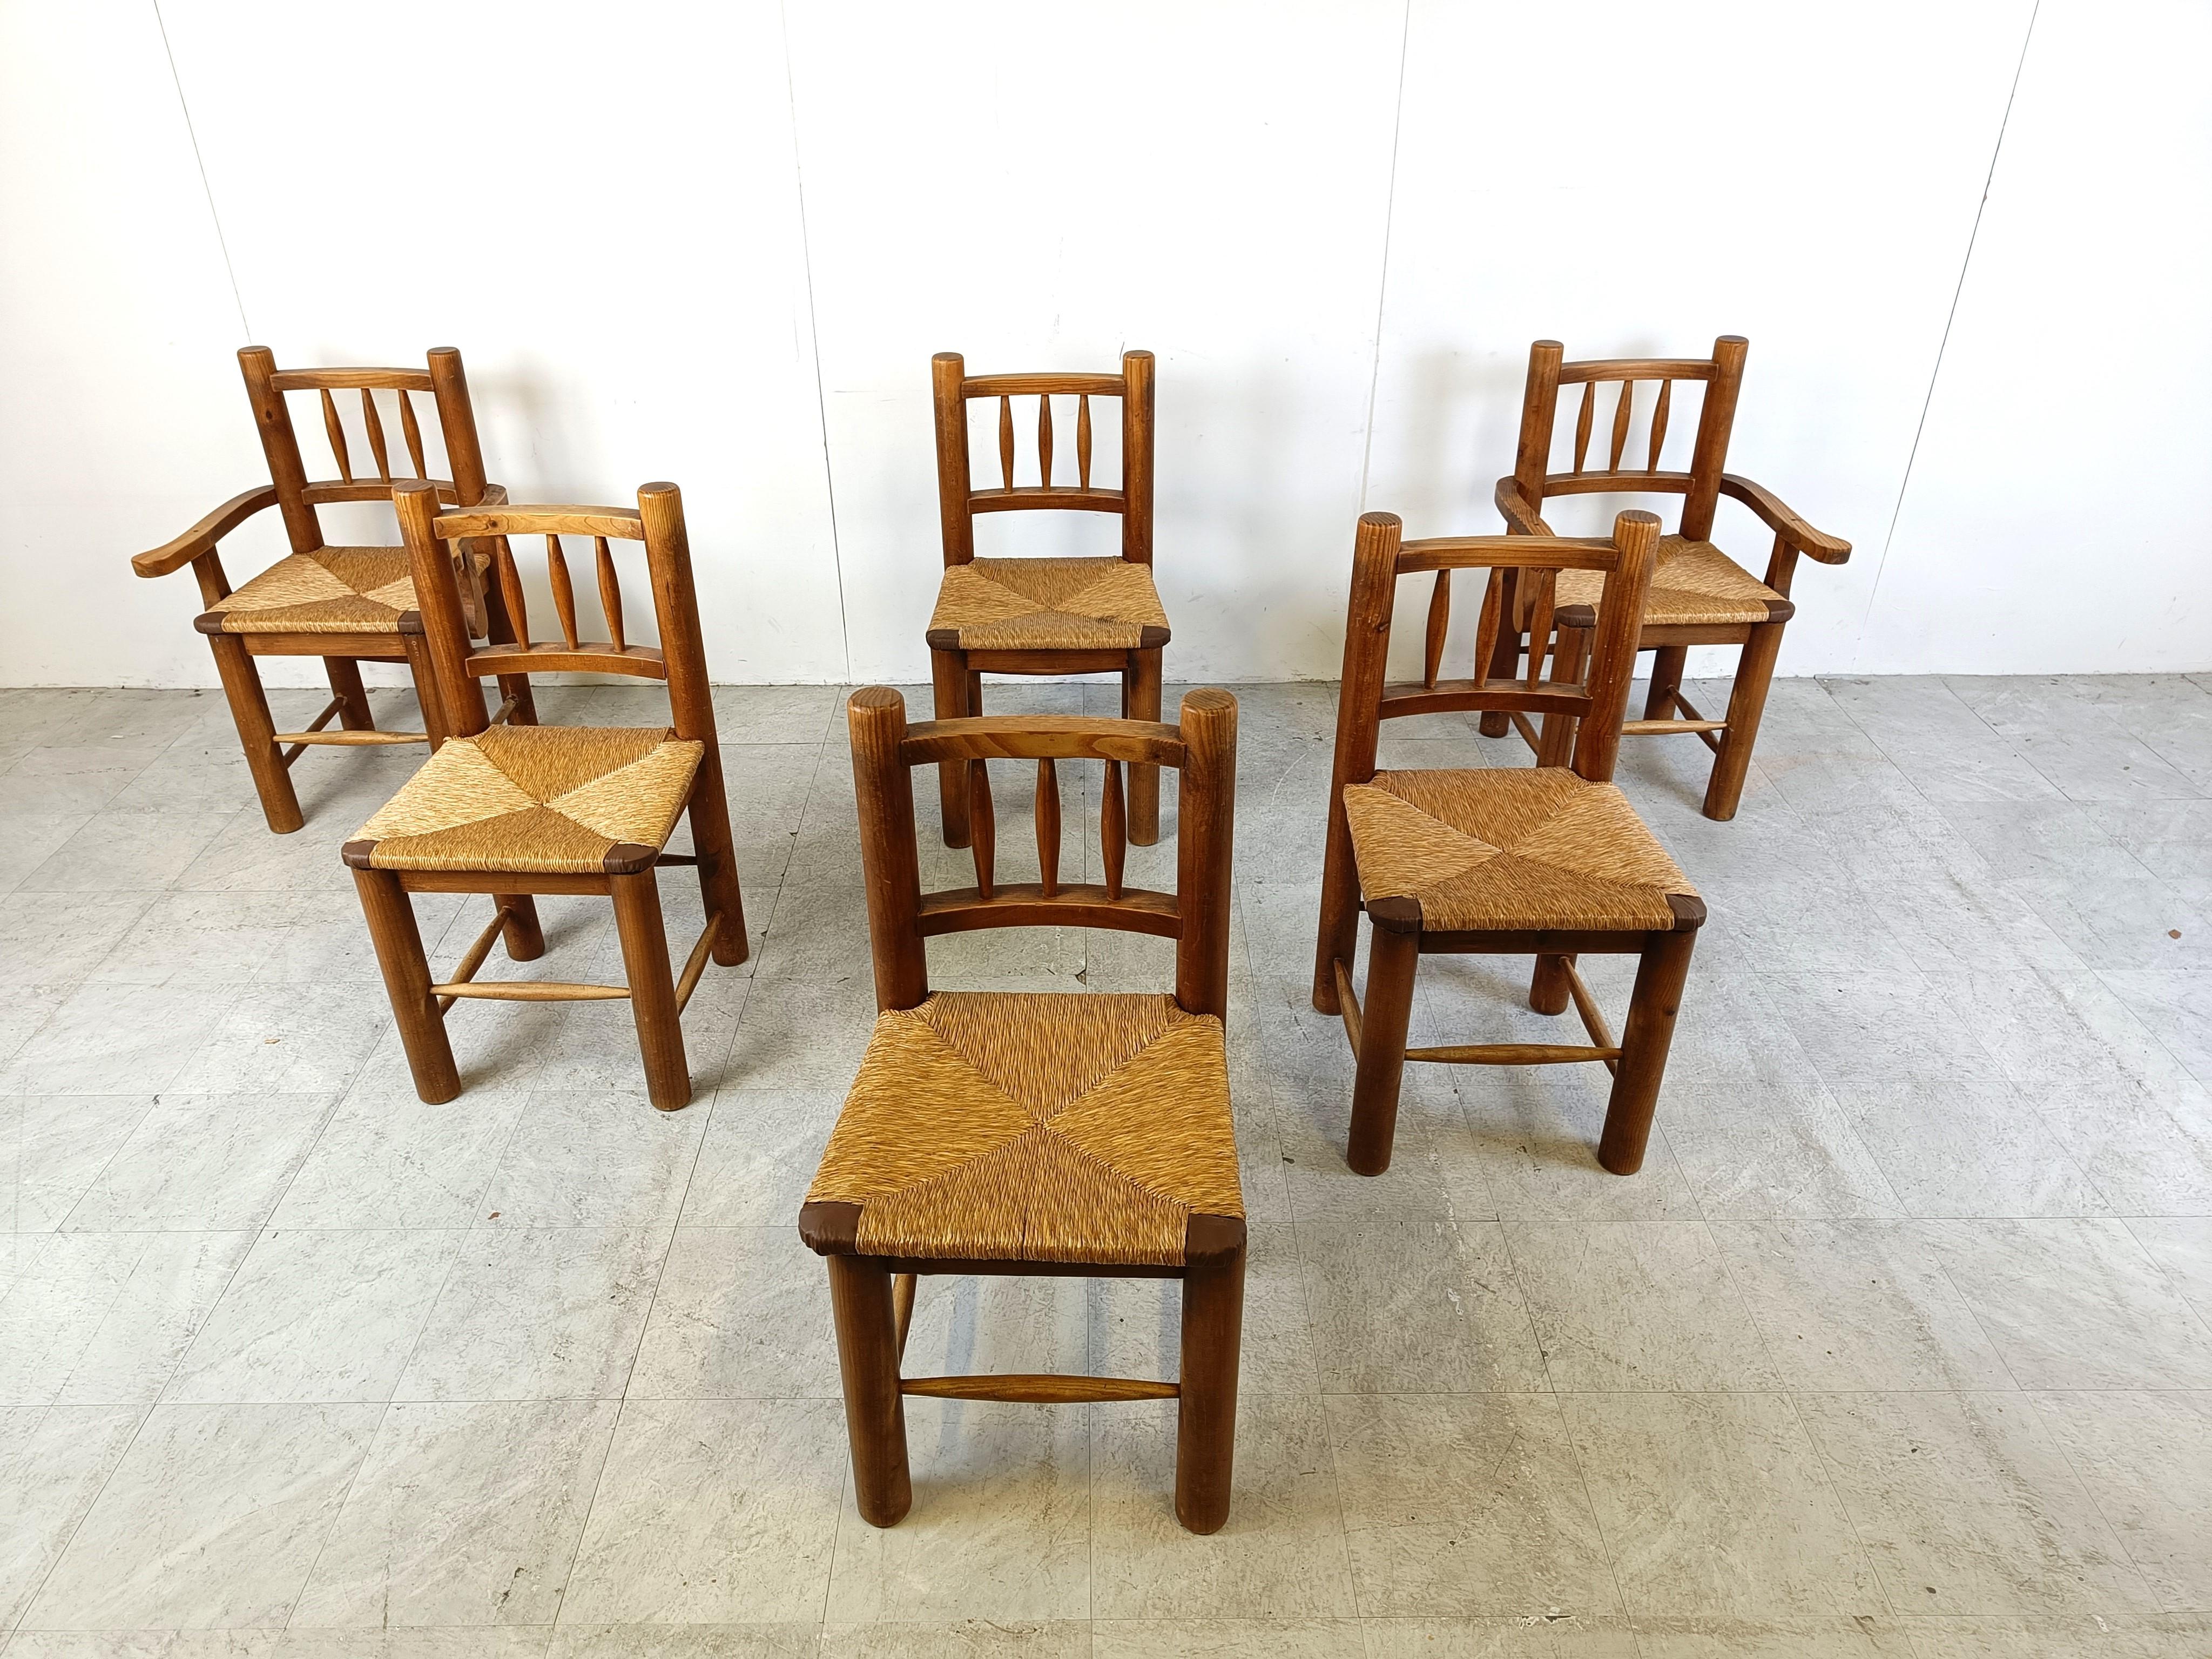 Vintage oak and wicker dining chairs.

Sturdy ever lasting oak frames with thick wicker seats.

A nice little details is the brown leather on the corners at the front of the seats.

1960s - Belgium

Good overall condition.

Dimensions:
Height: